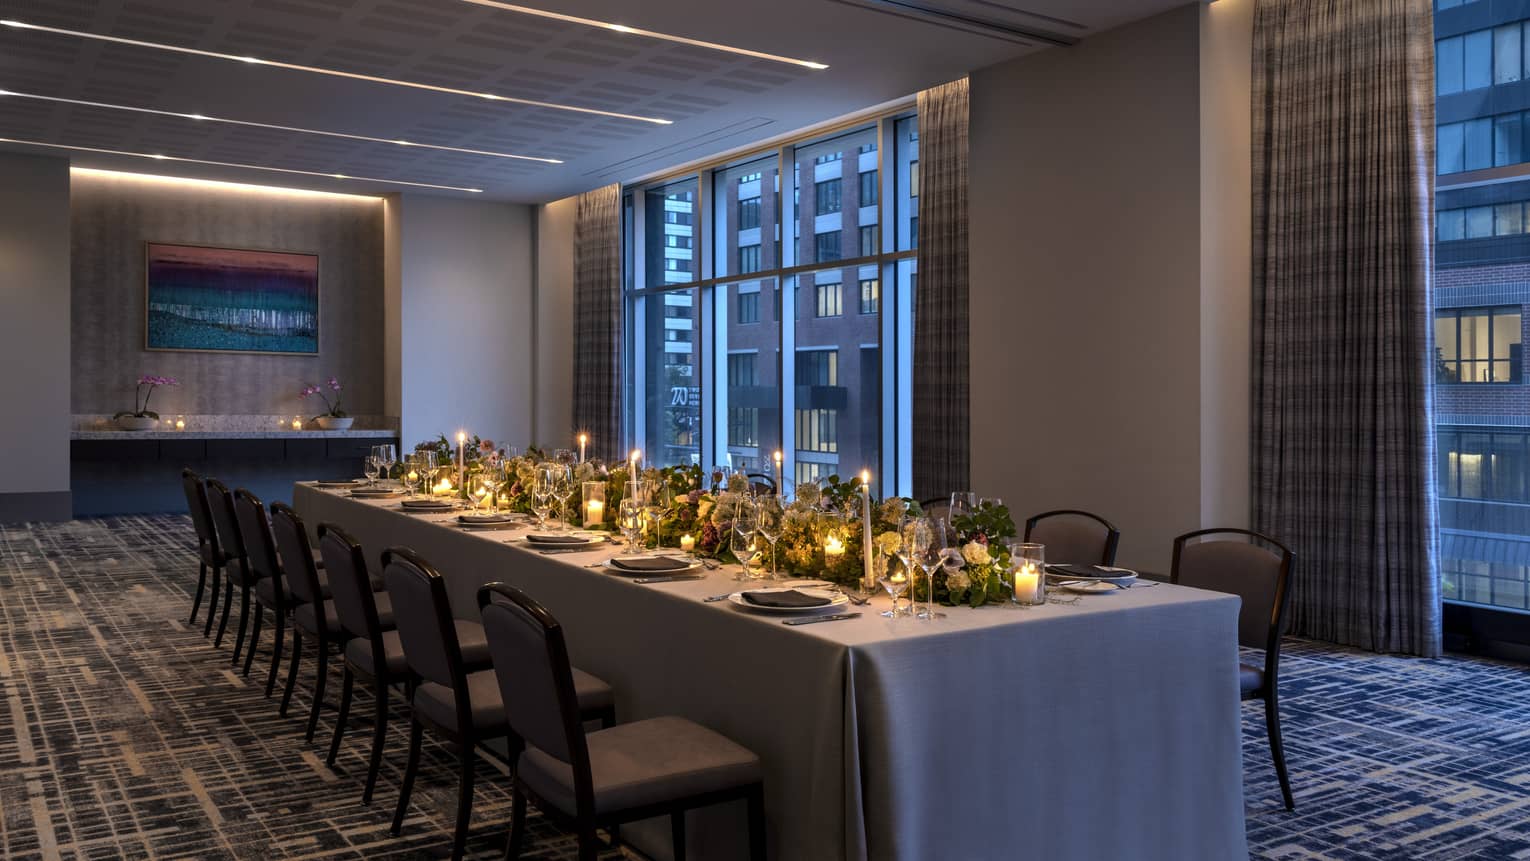 A long table with candles and flowers in a dimly lit room.